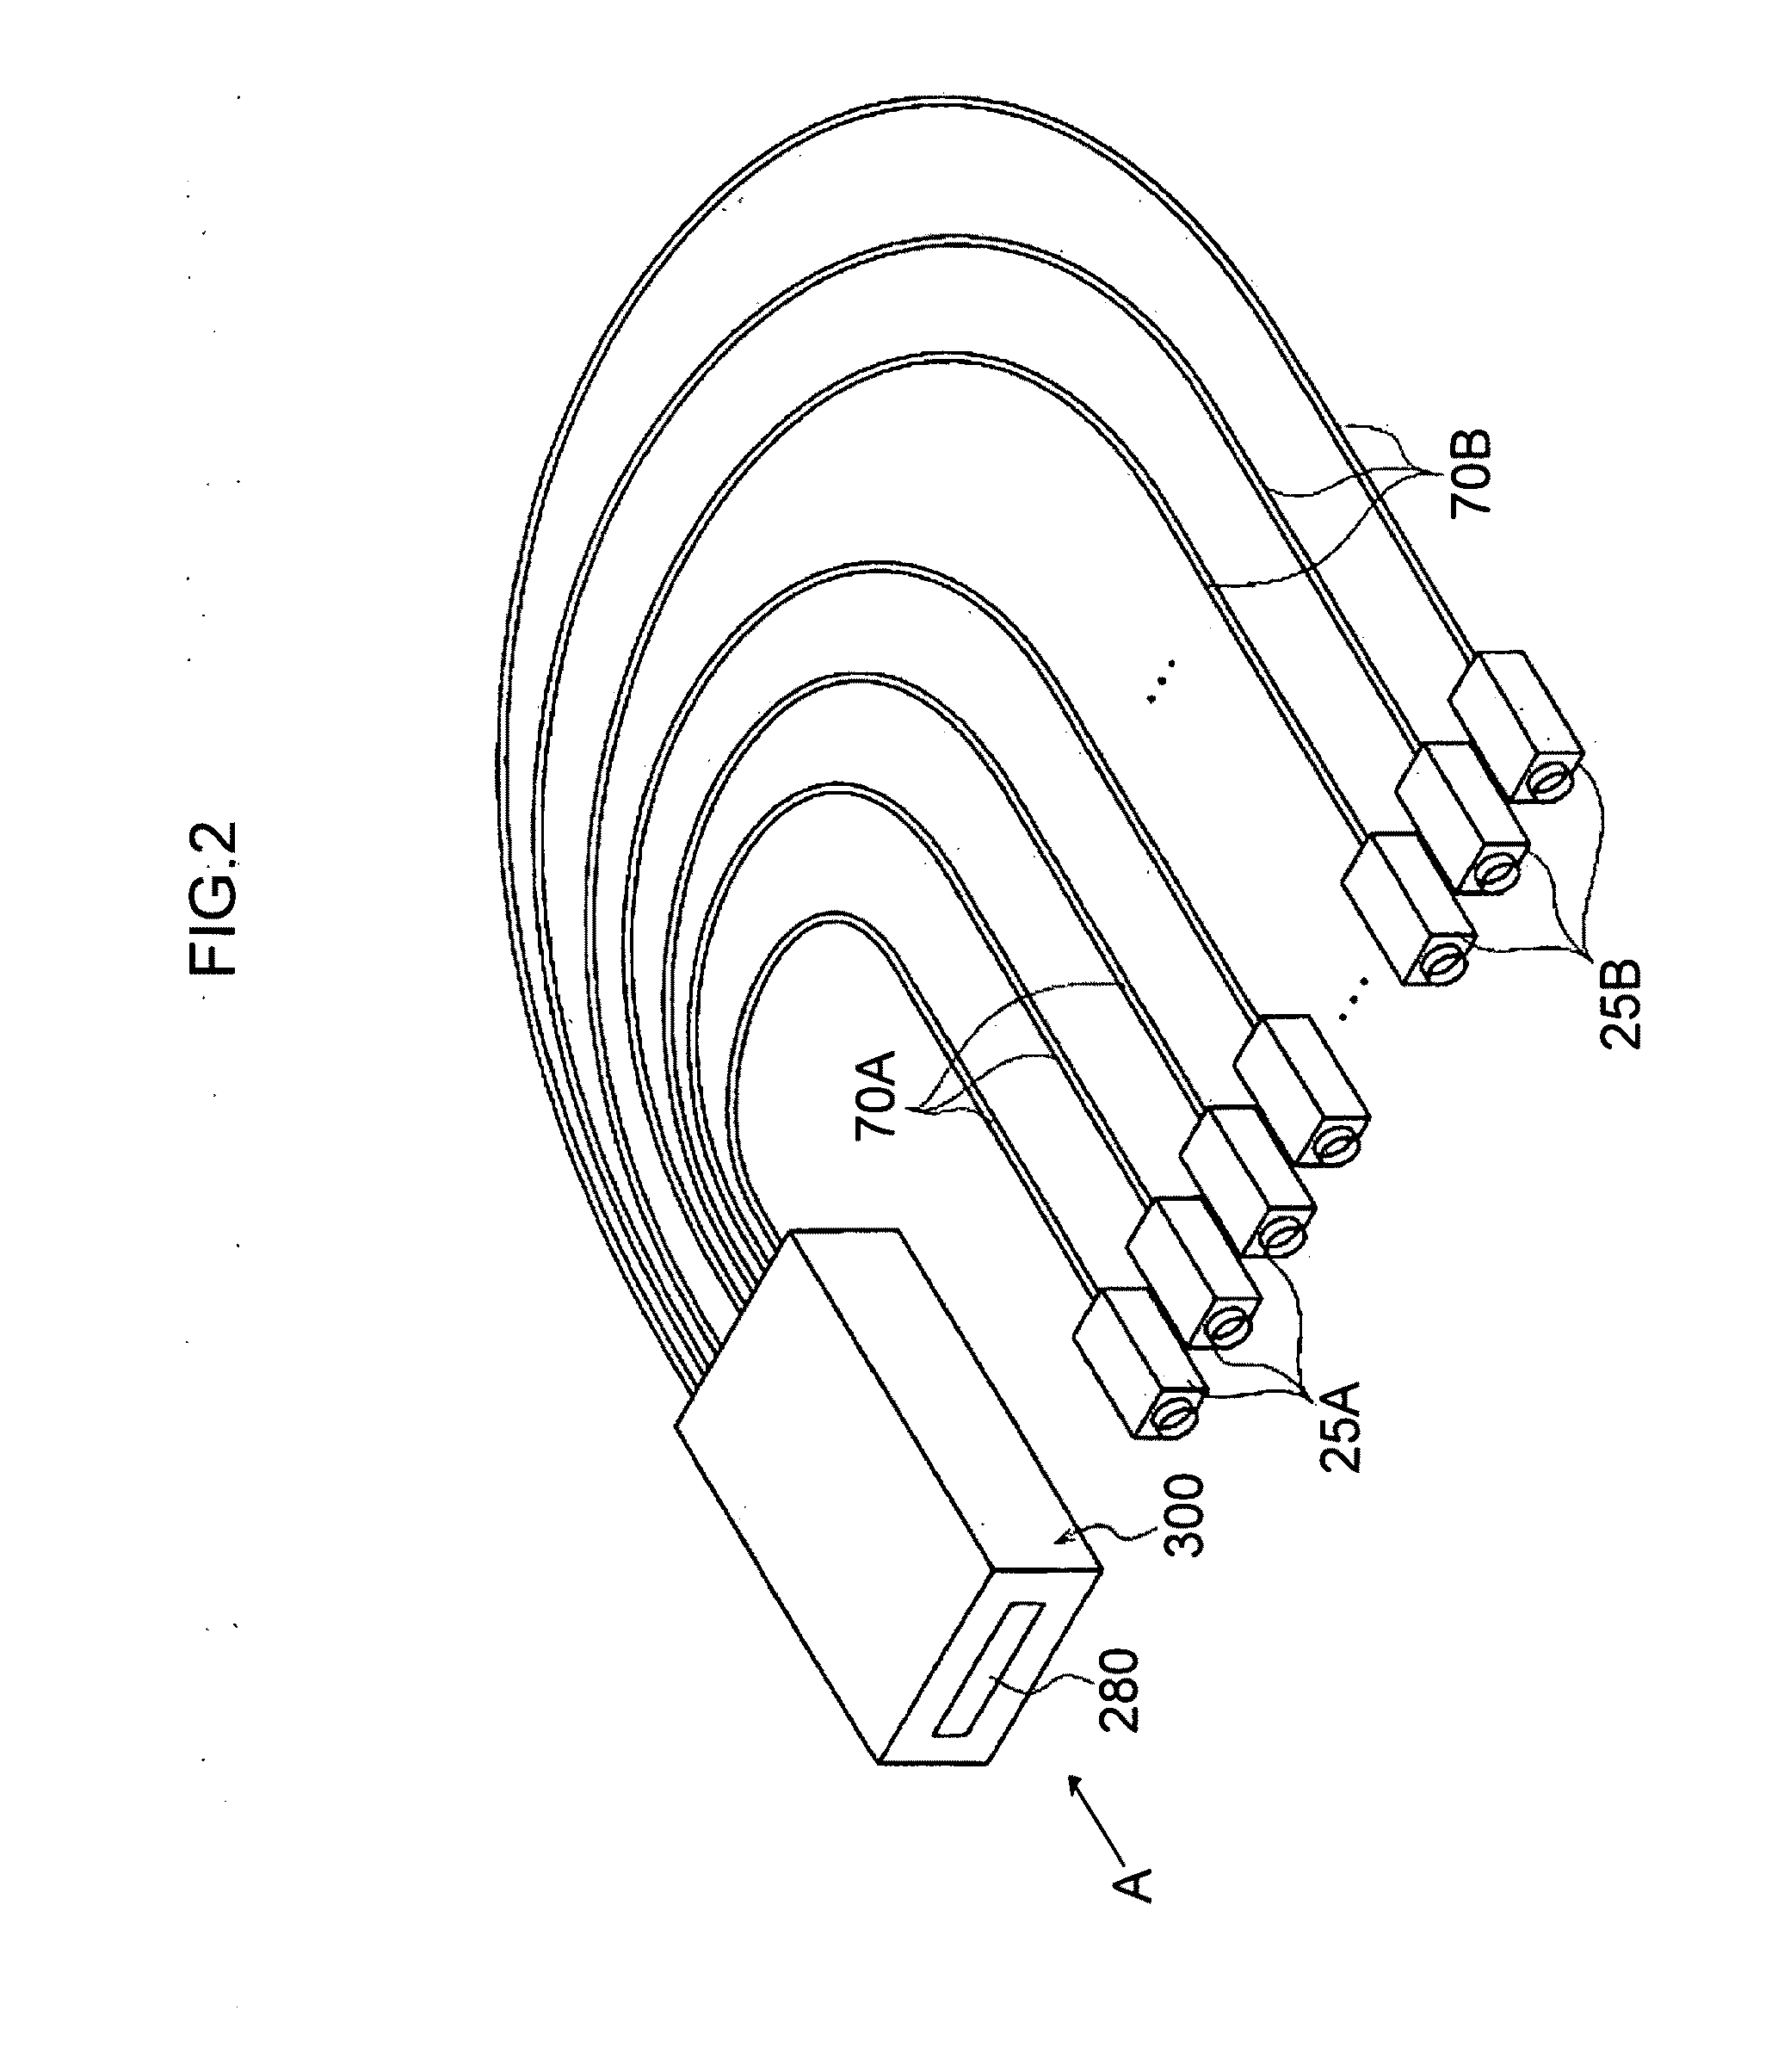 Multi-beam exposure scanning method and apparatus, and method for manufacturing printing plate